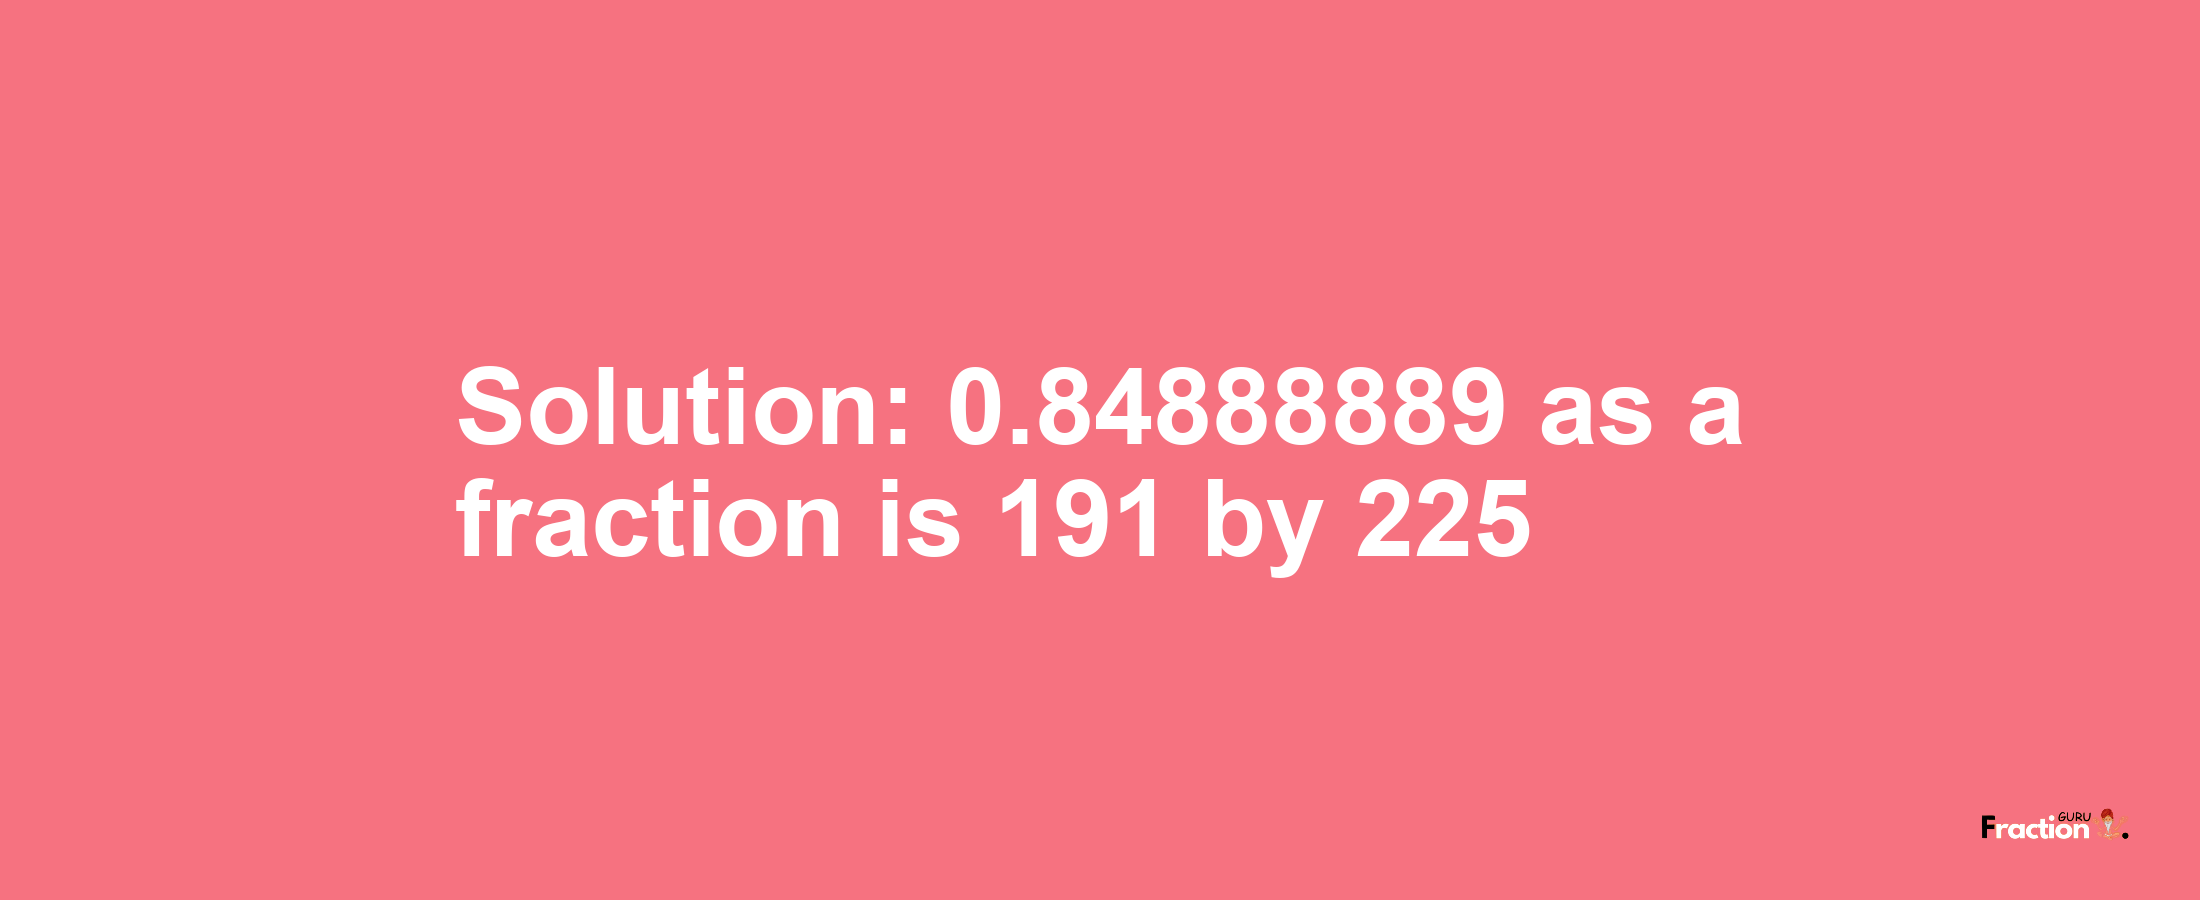 Solution:0.84888889 as a fraction is 191/225